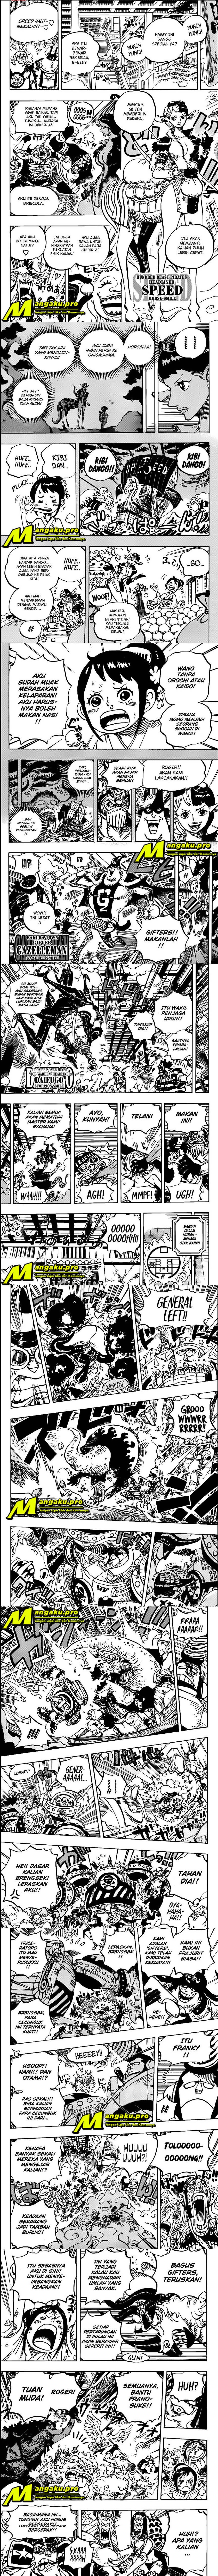 One Piece Chapter 1004 Image 1